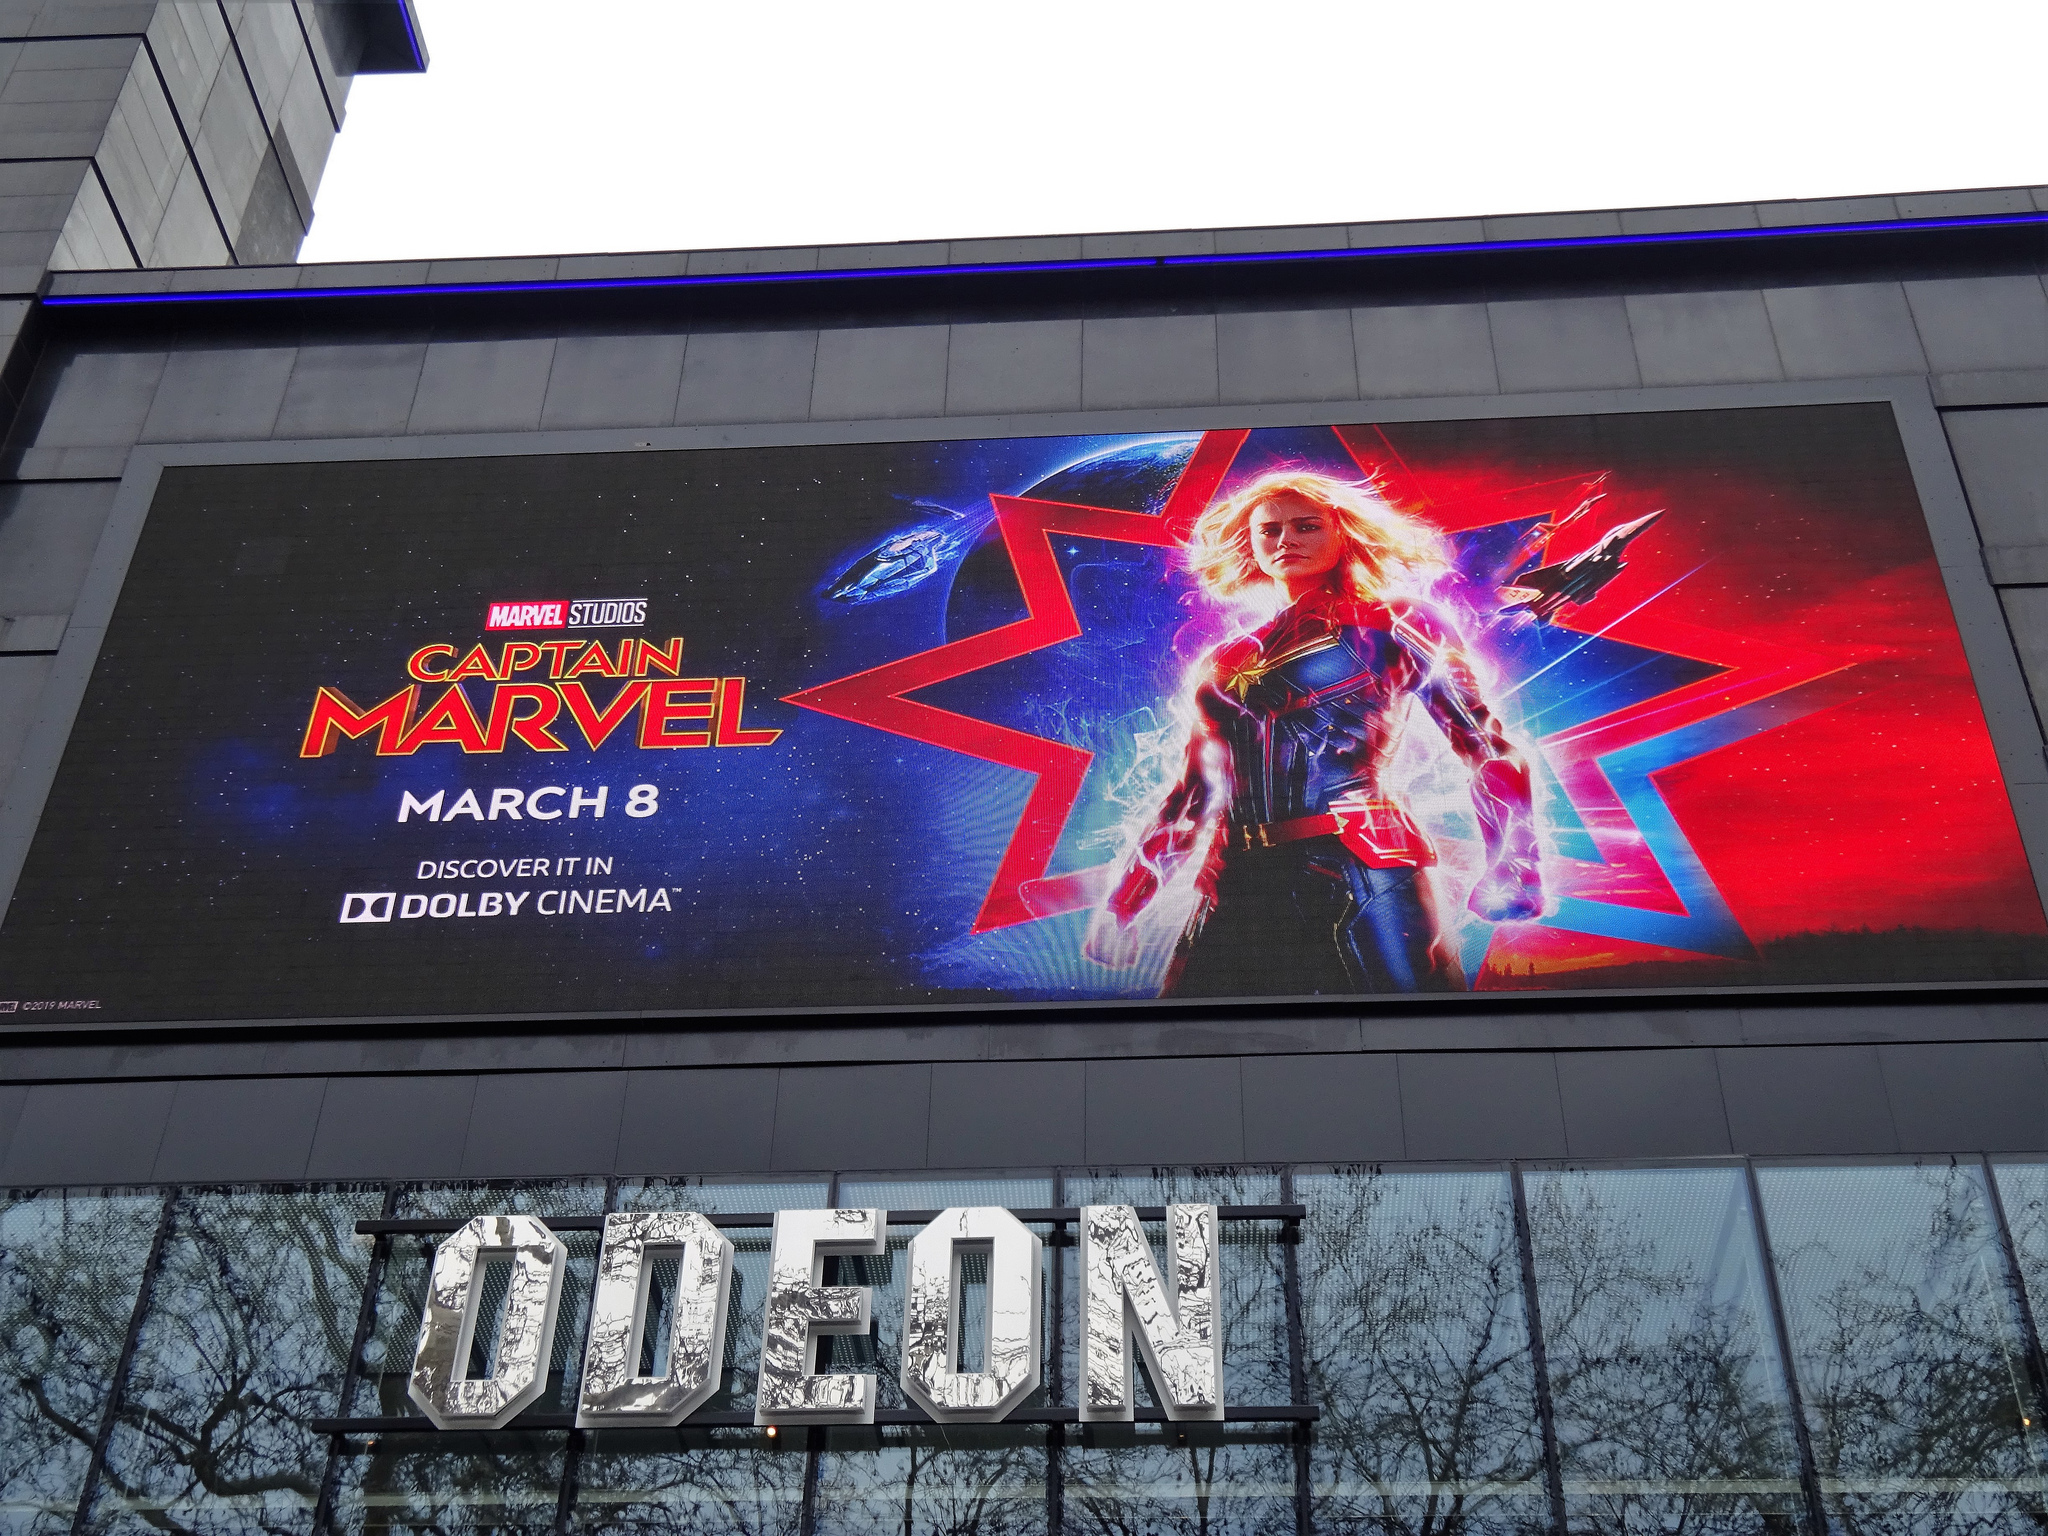 Photograph of a Captain Marvel poster above a movie theatre entrance; the poster shows Brie Larson as Captain Marvel standing with a star and flashing lights behind her